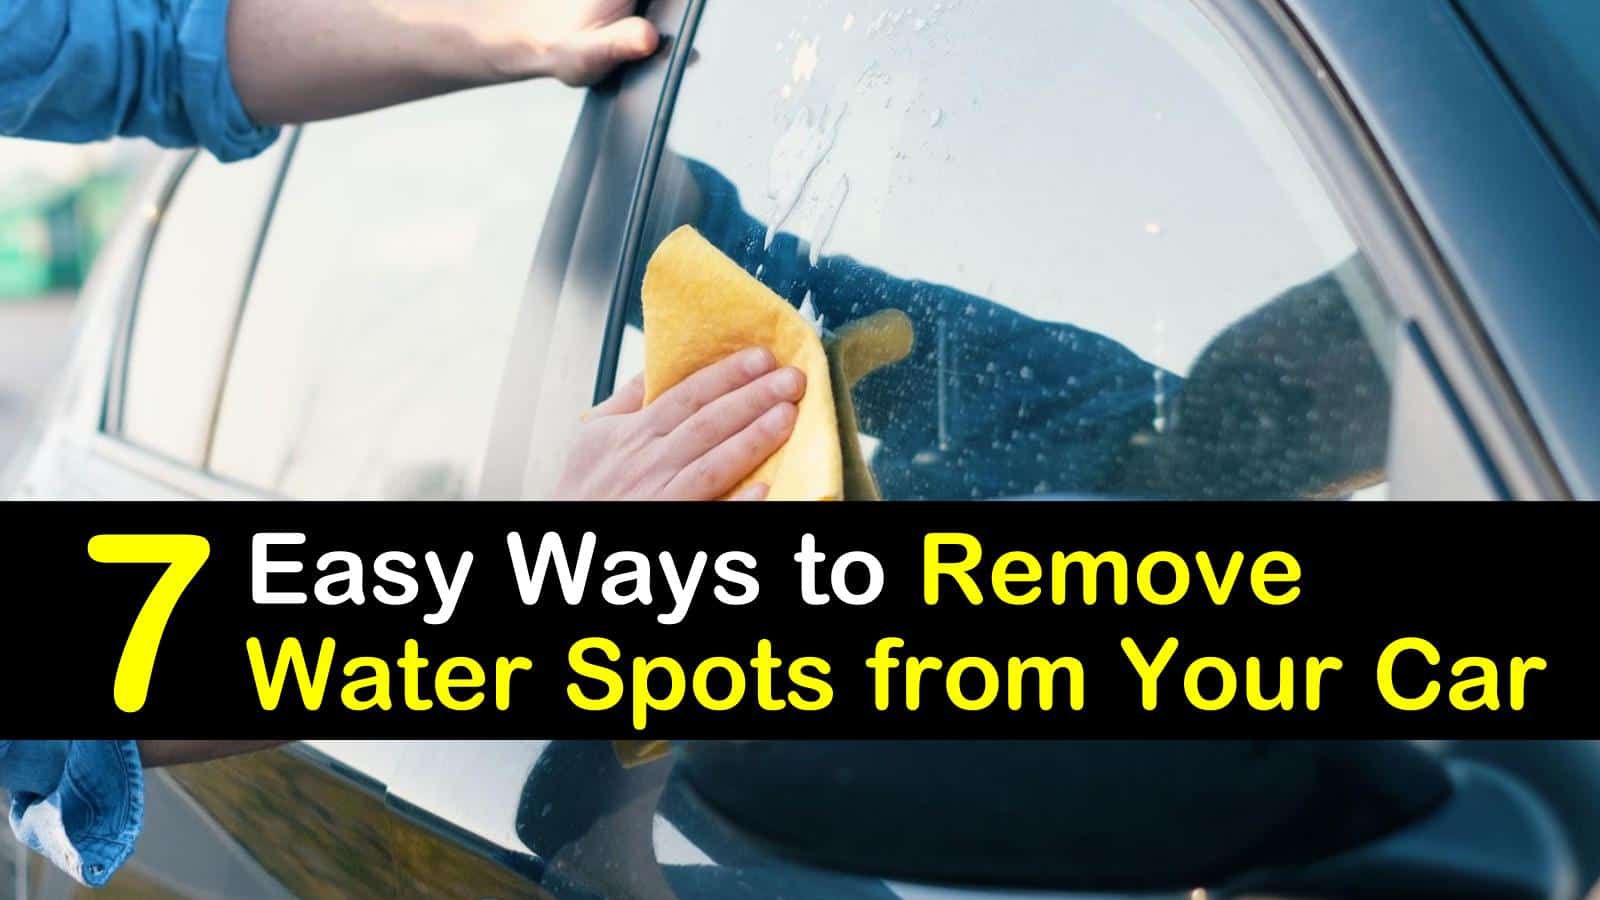 how to remove water spots from a car titleimg1